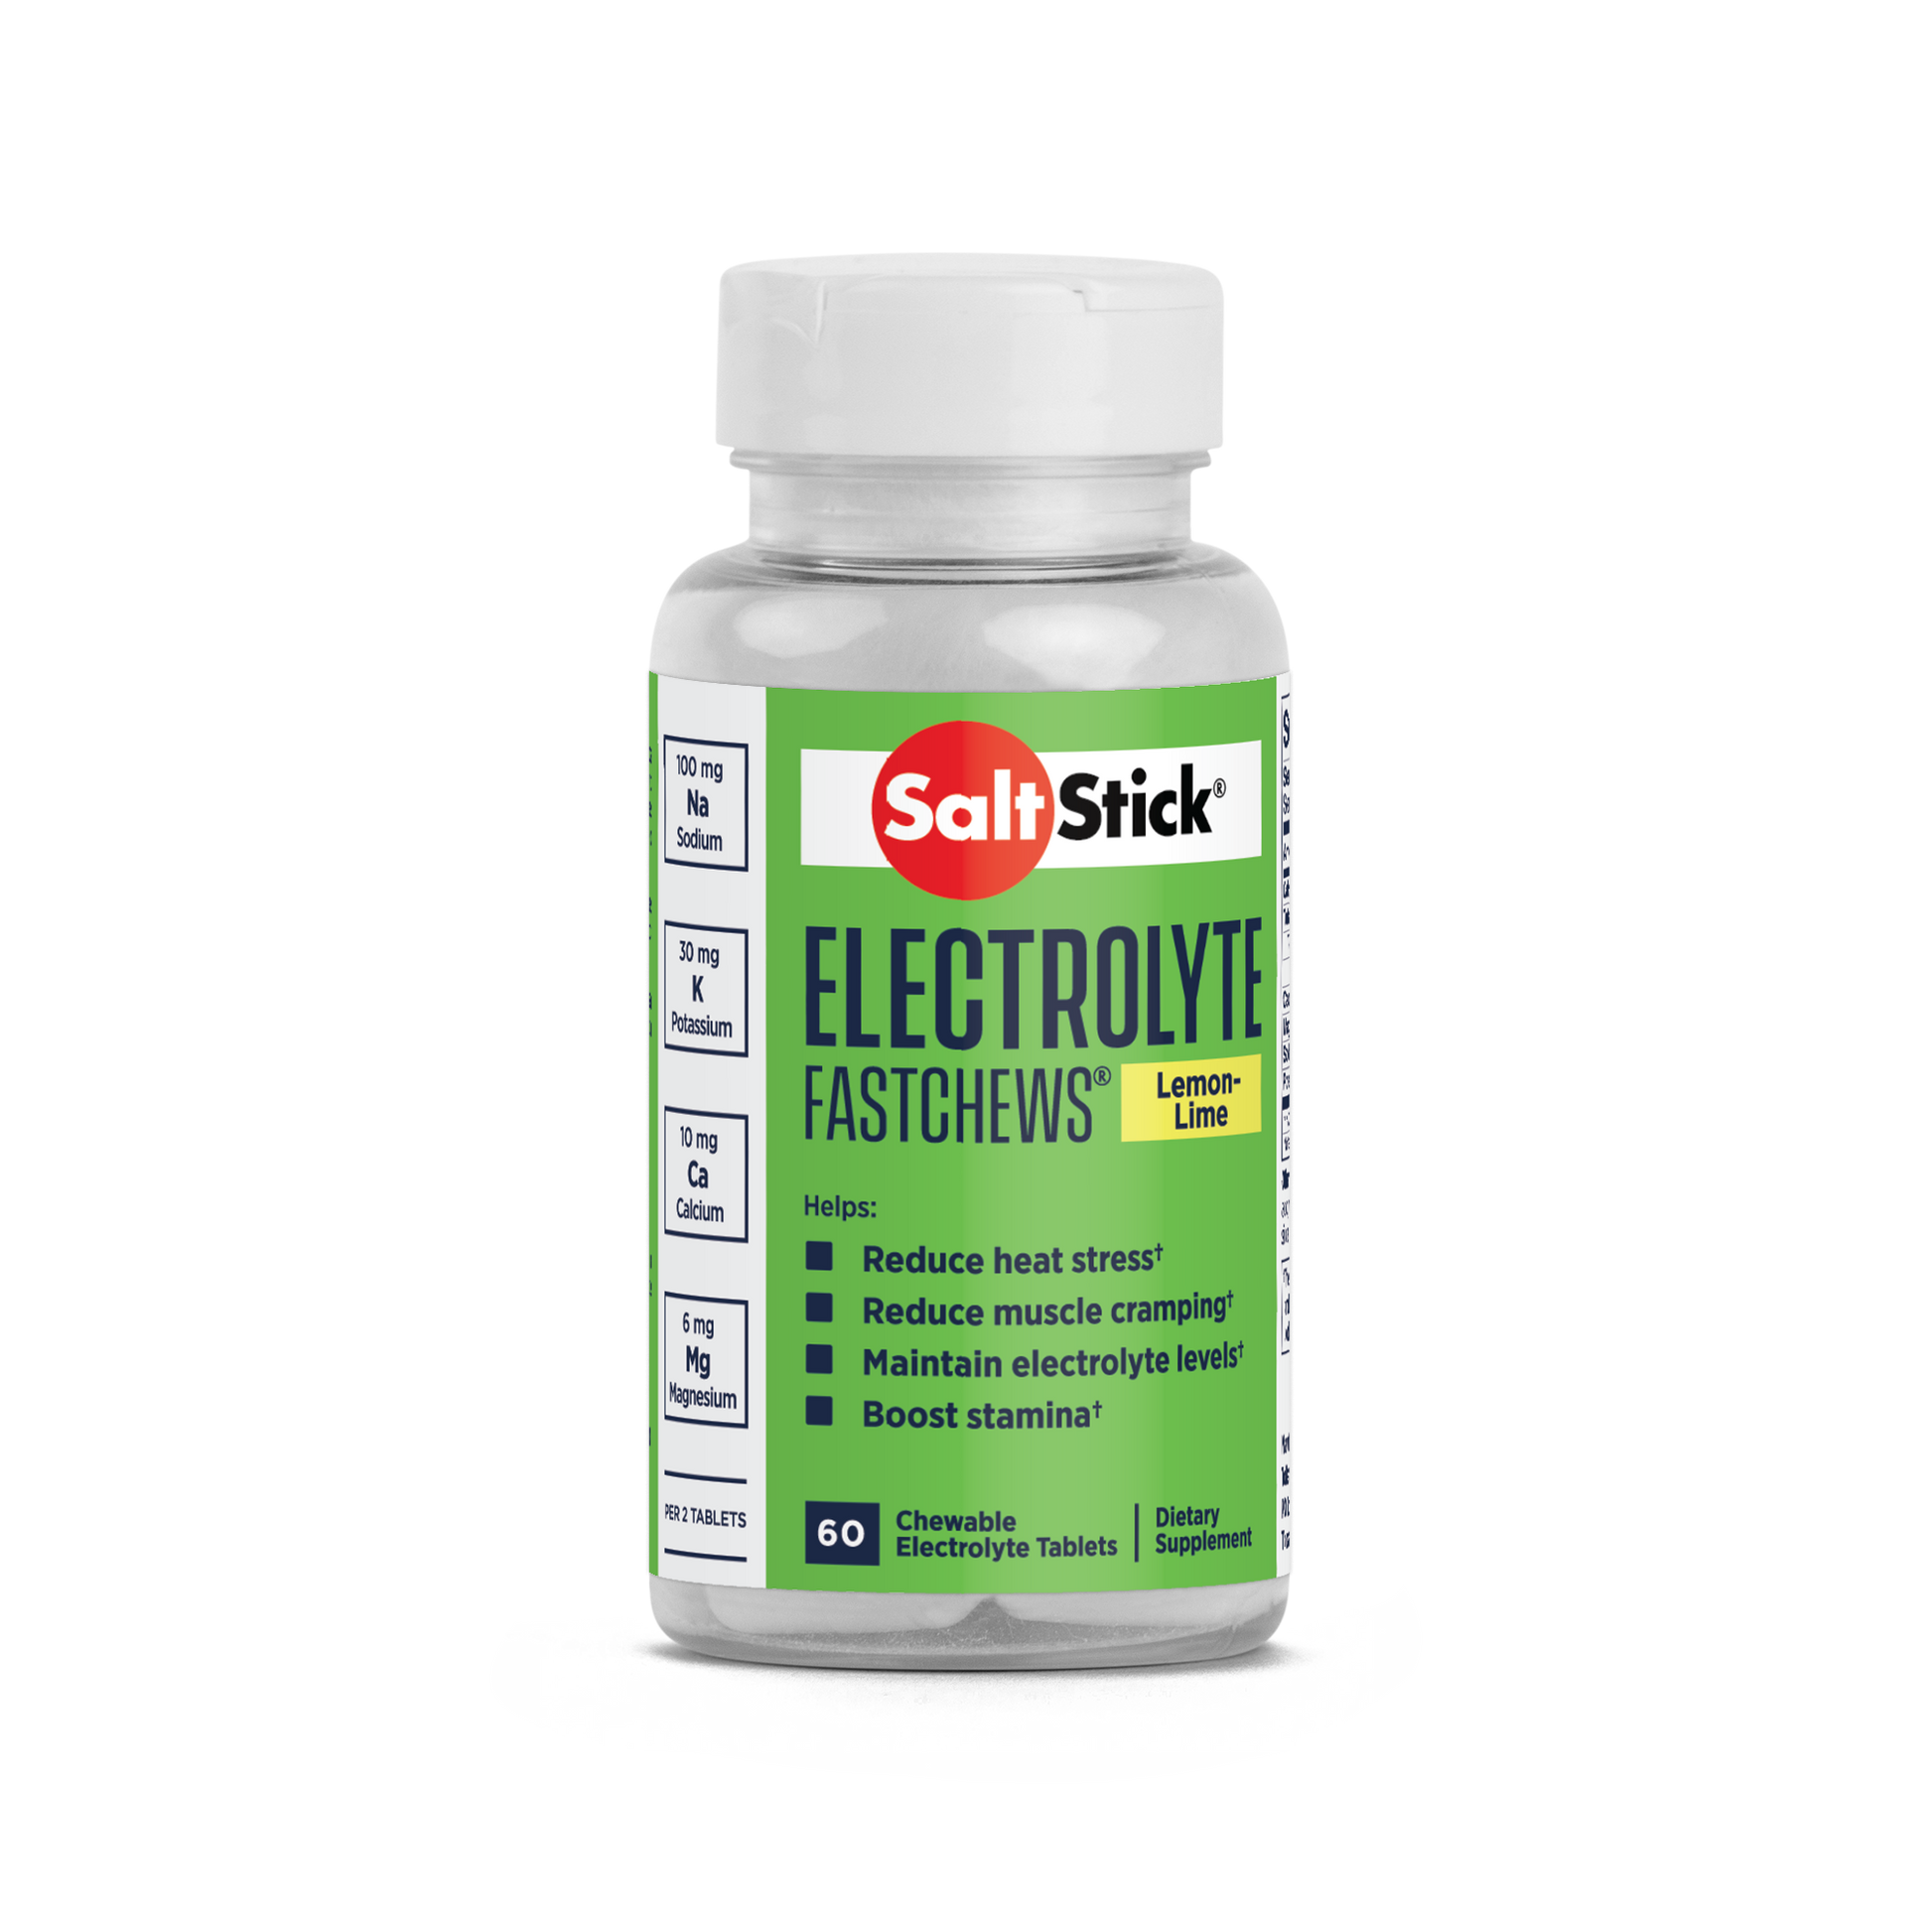 Are these Electrolyte salts good? : r/fasting